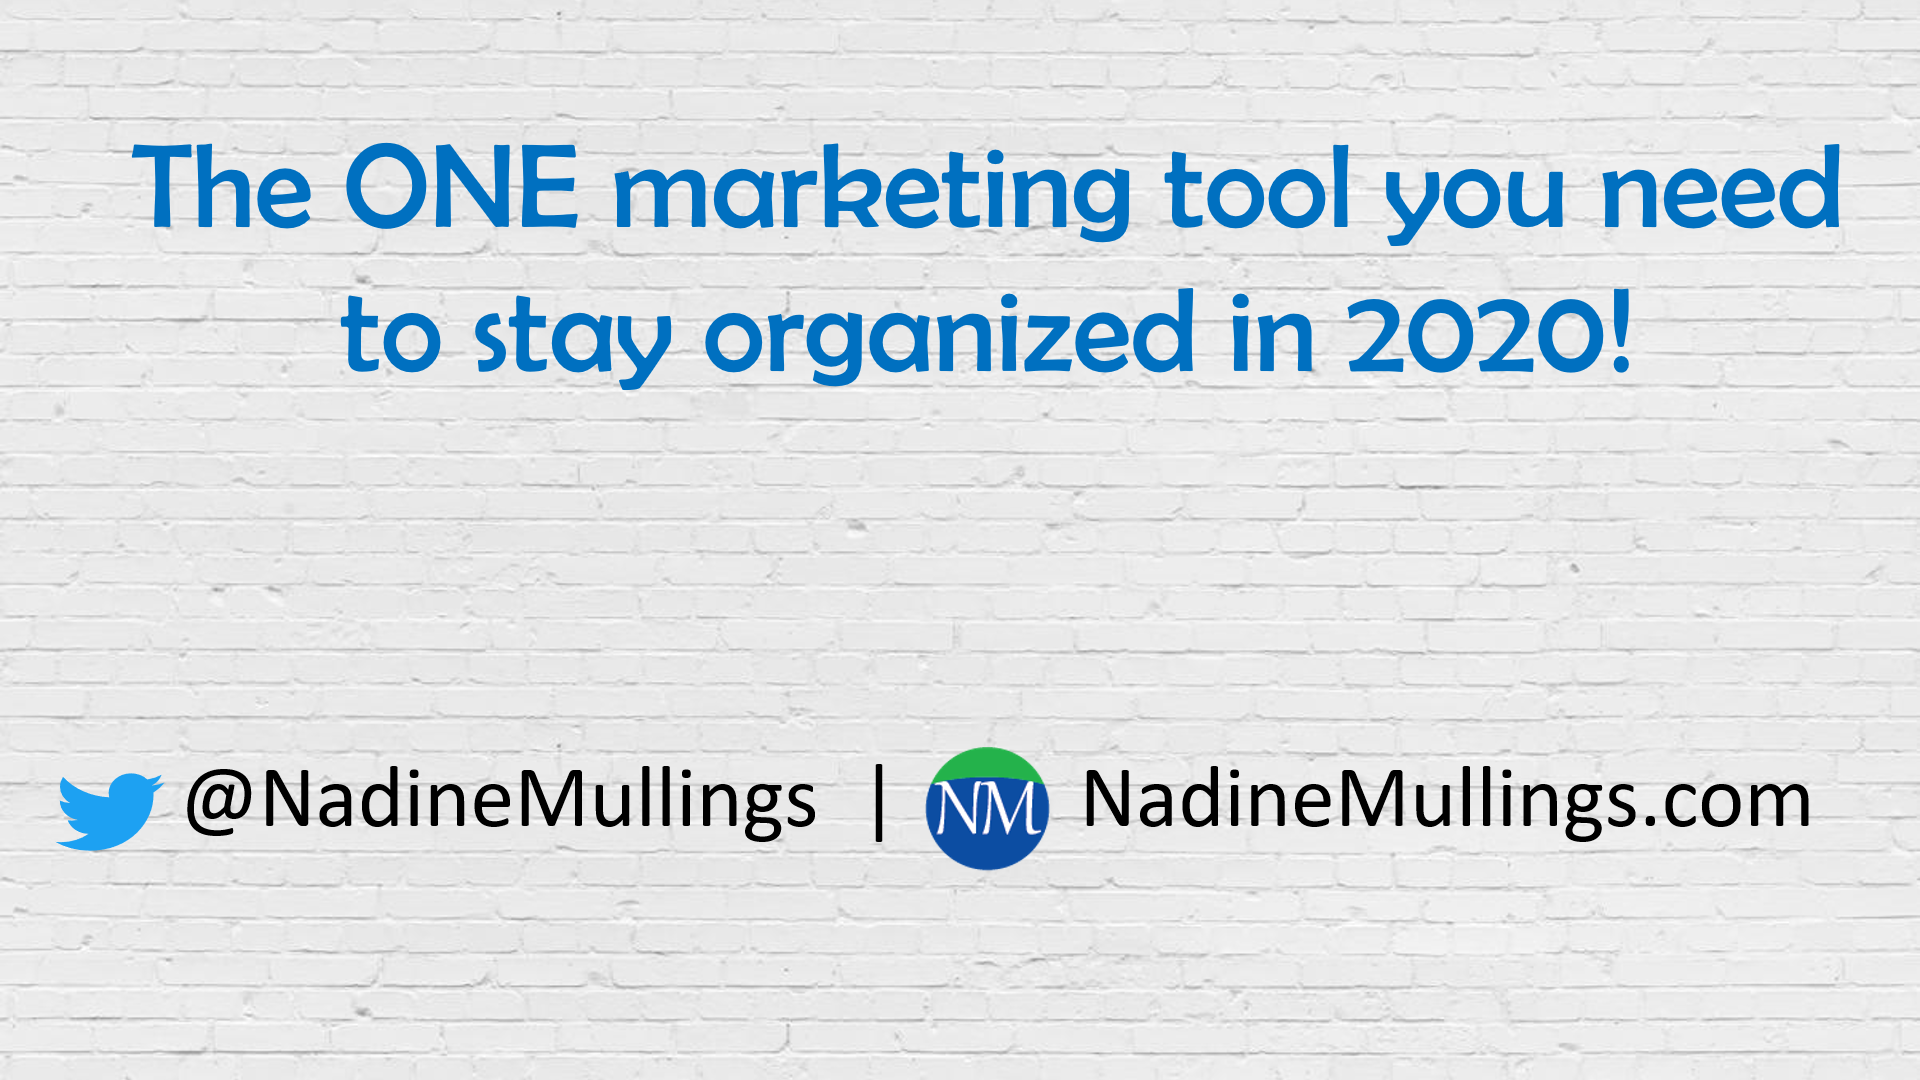  THE ONE MARKETING TOOL YOU NEED TO STAY ORGANIZED IN 2020!